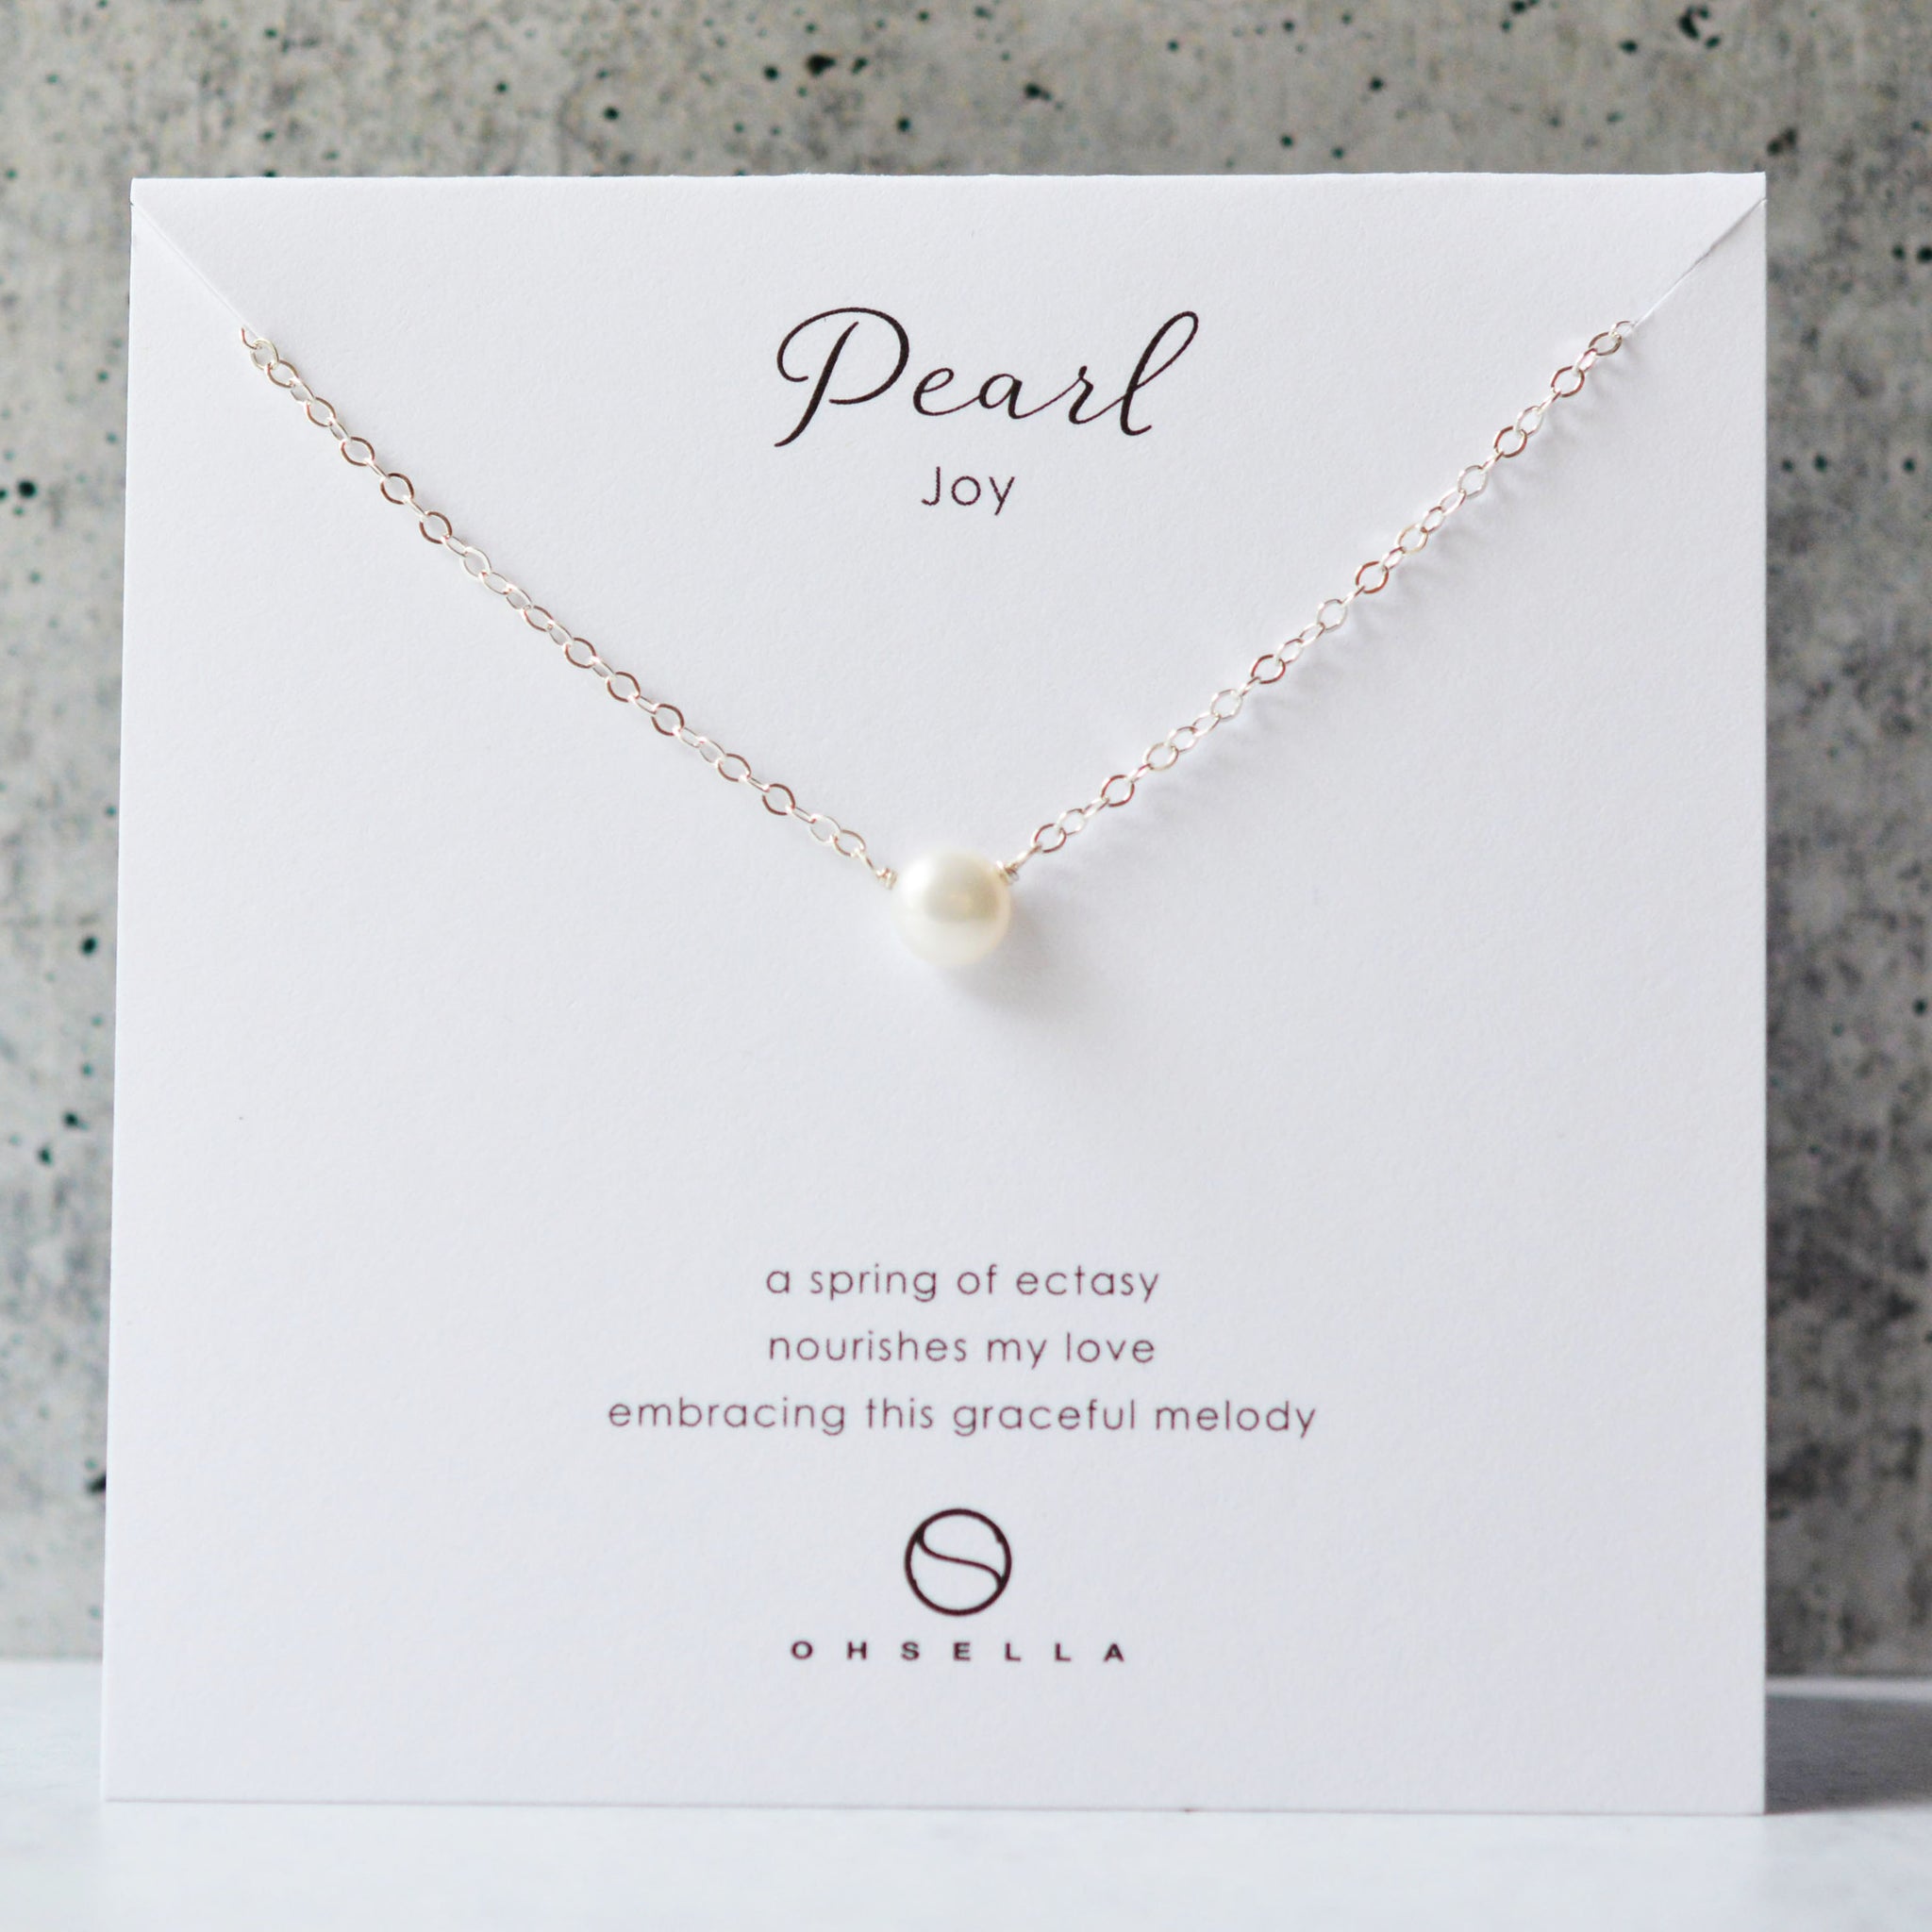 Dainty pearl necklace, freshwater pearl, single pearl necklace, gift for  girls | eBay